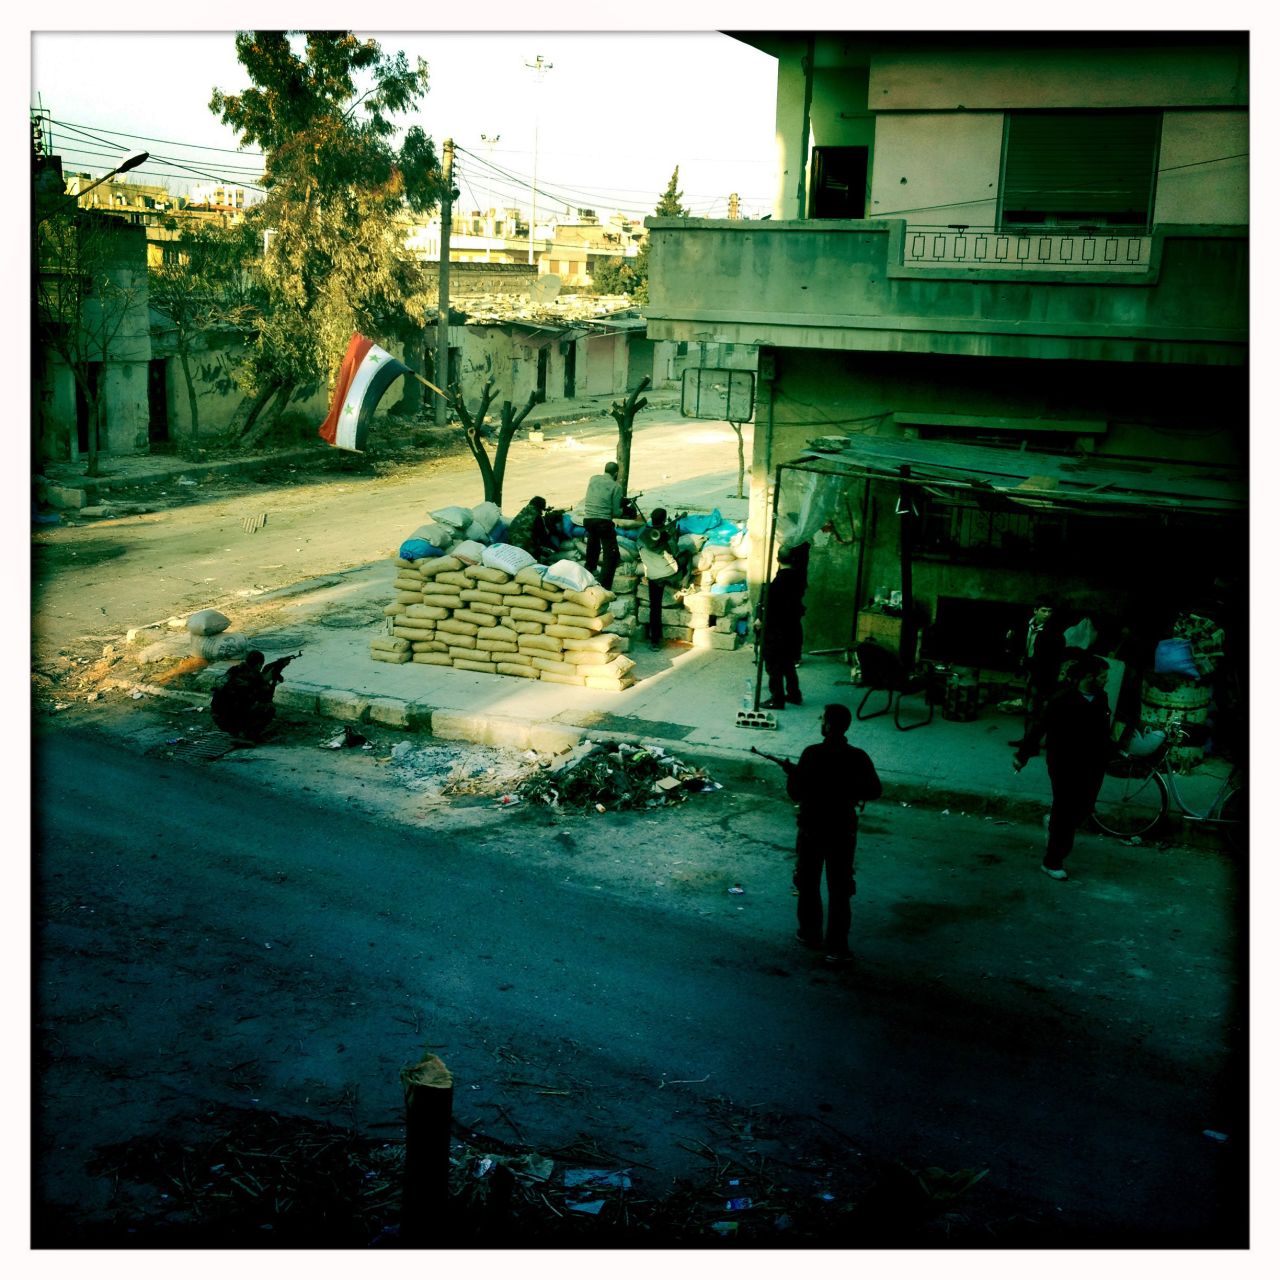 A checkpoint controlled by the Free Syrian Army is pictured in the neighborhood of Baba Amr in Homs.